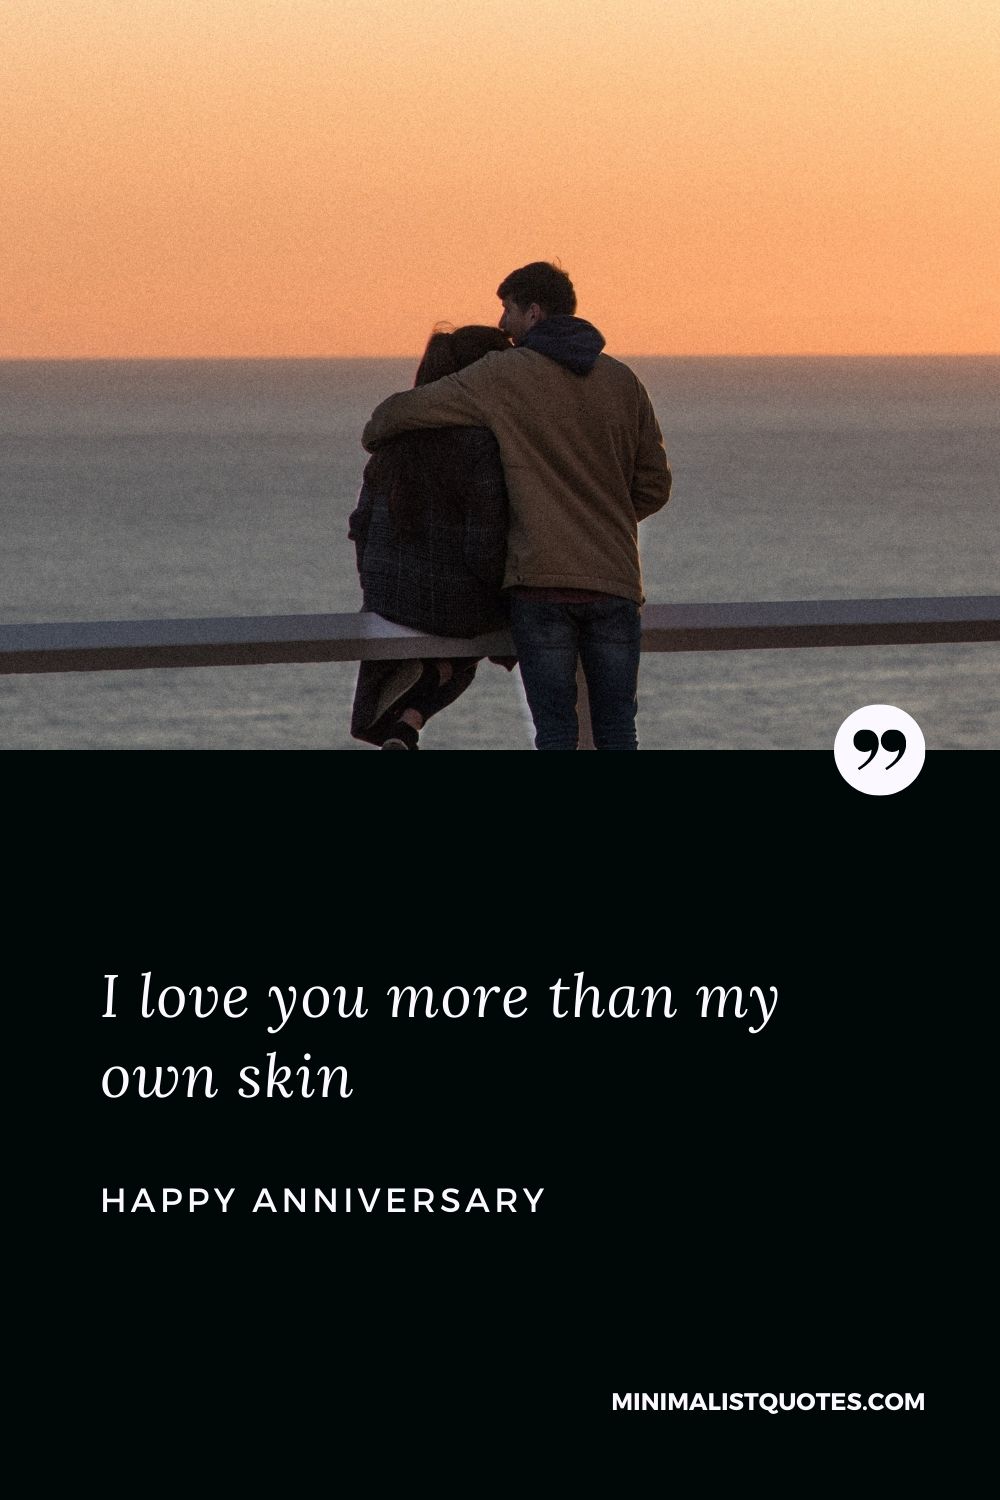 Anniversary wish & message with HD image: I love you more than my own skin. Happy Anniversary!